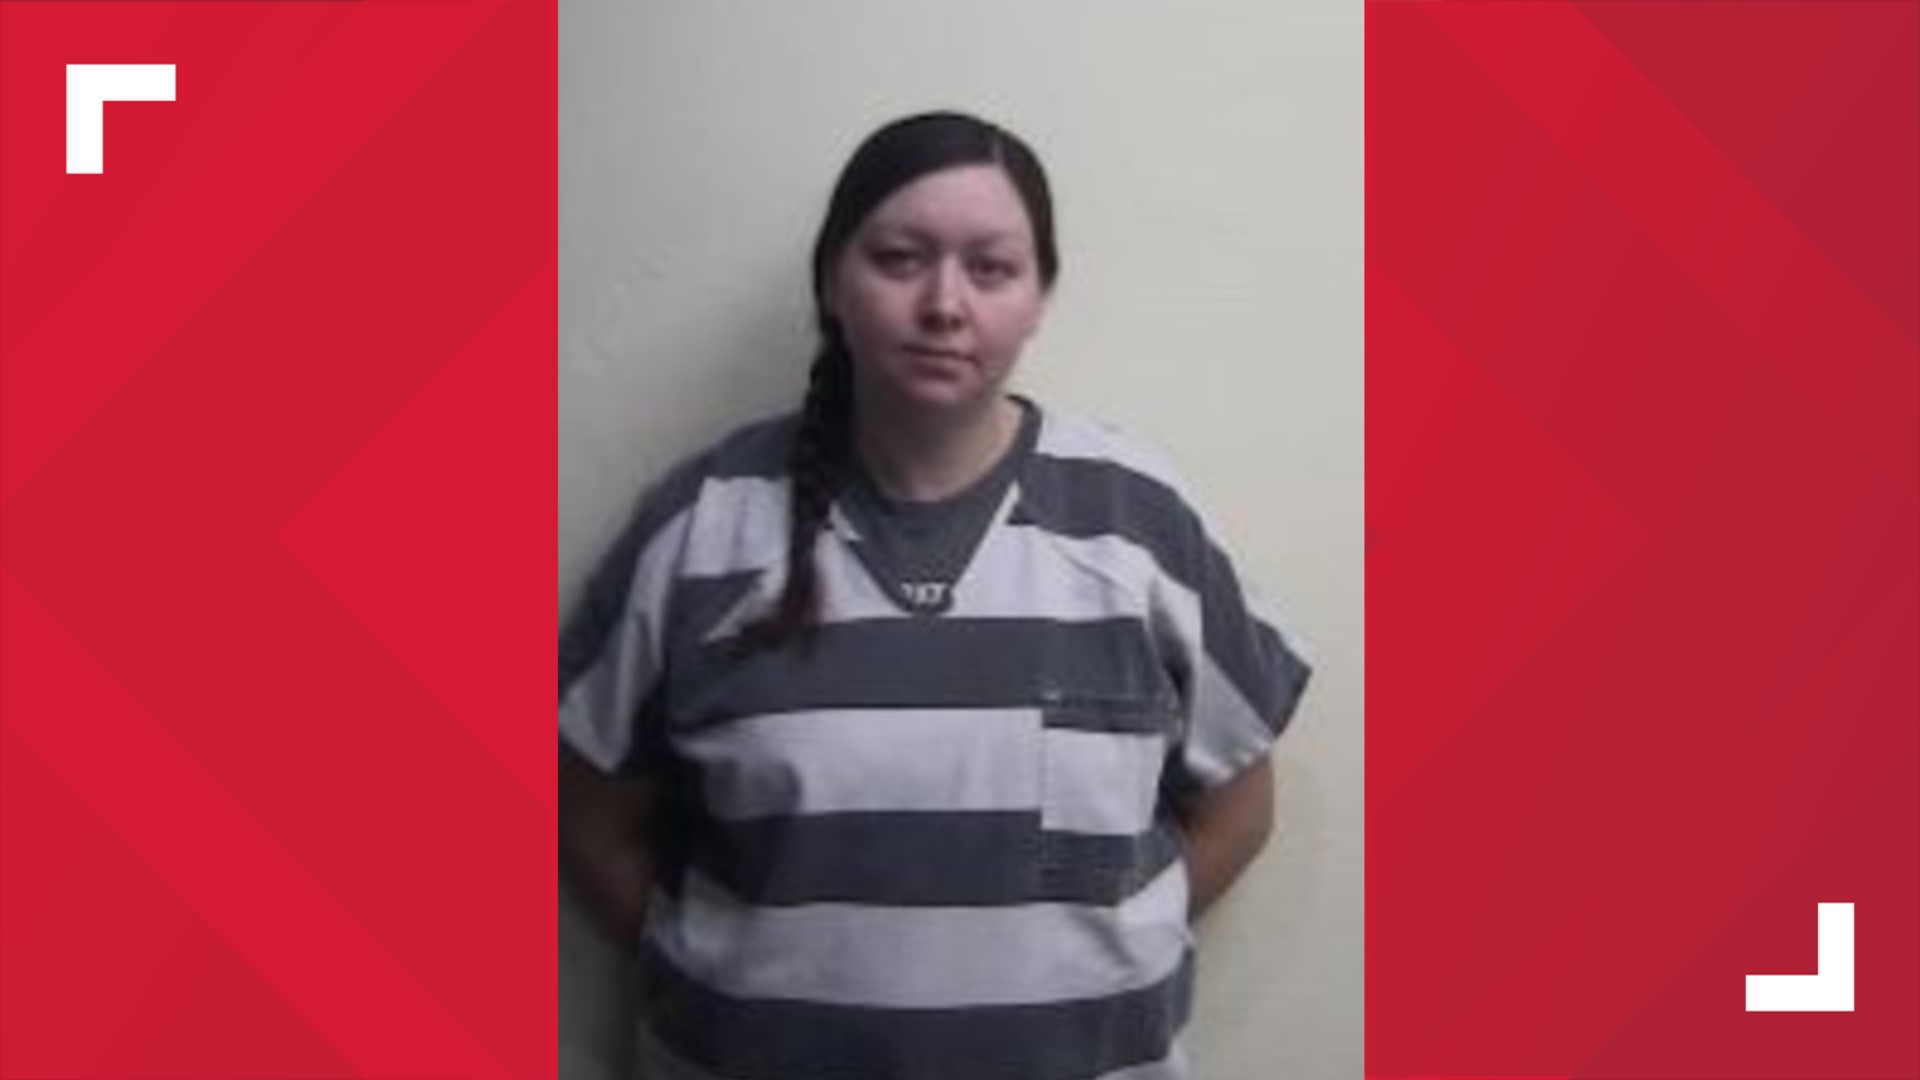 31-year-old Samantha Meyer-Davis turned herself in to local law enforcement after a warrant was issued for her arrest on Monday.